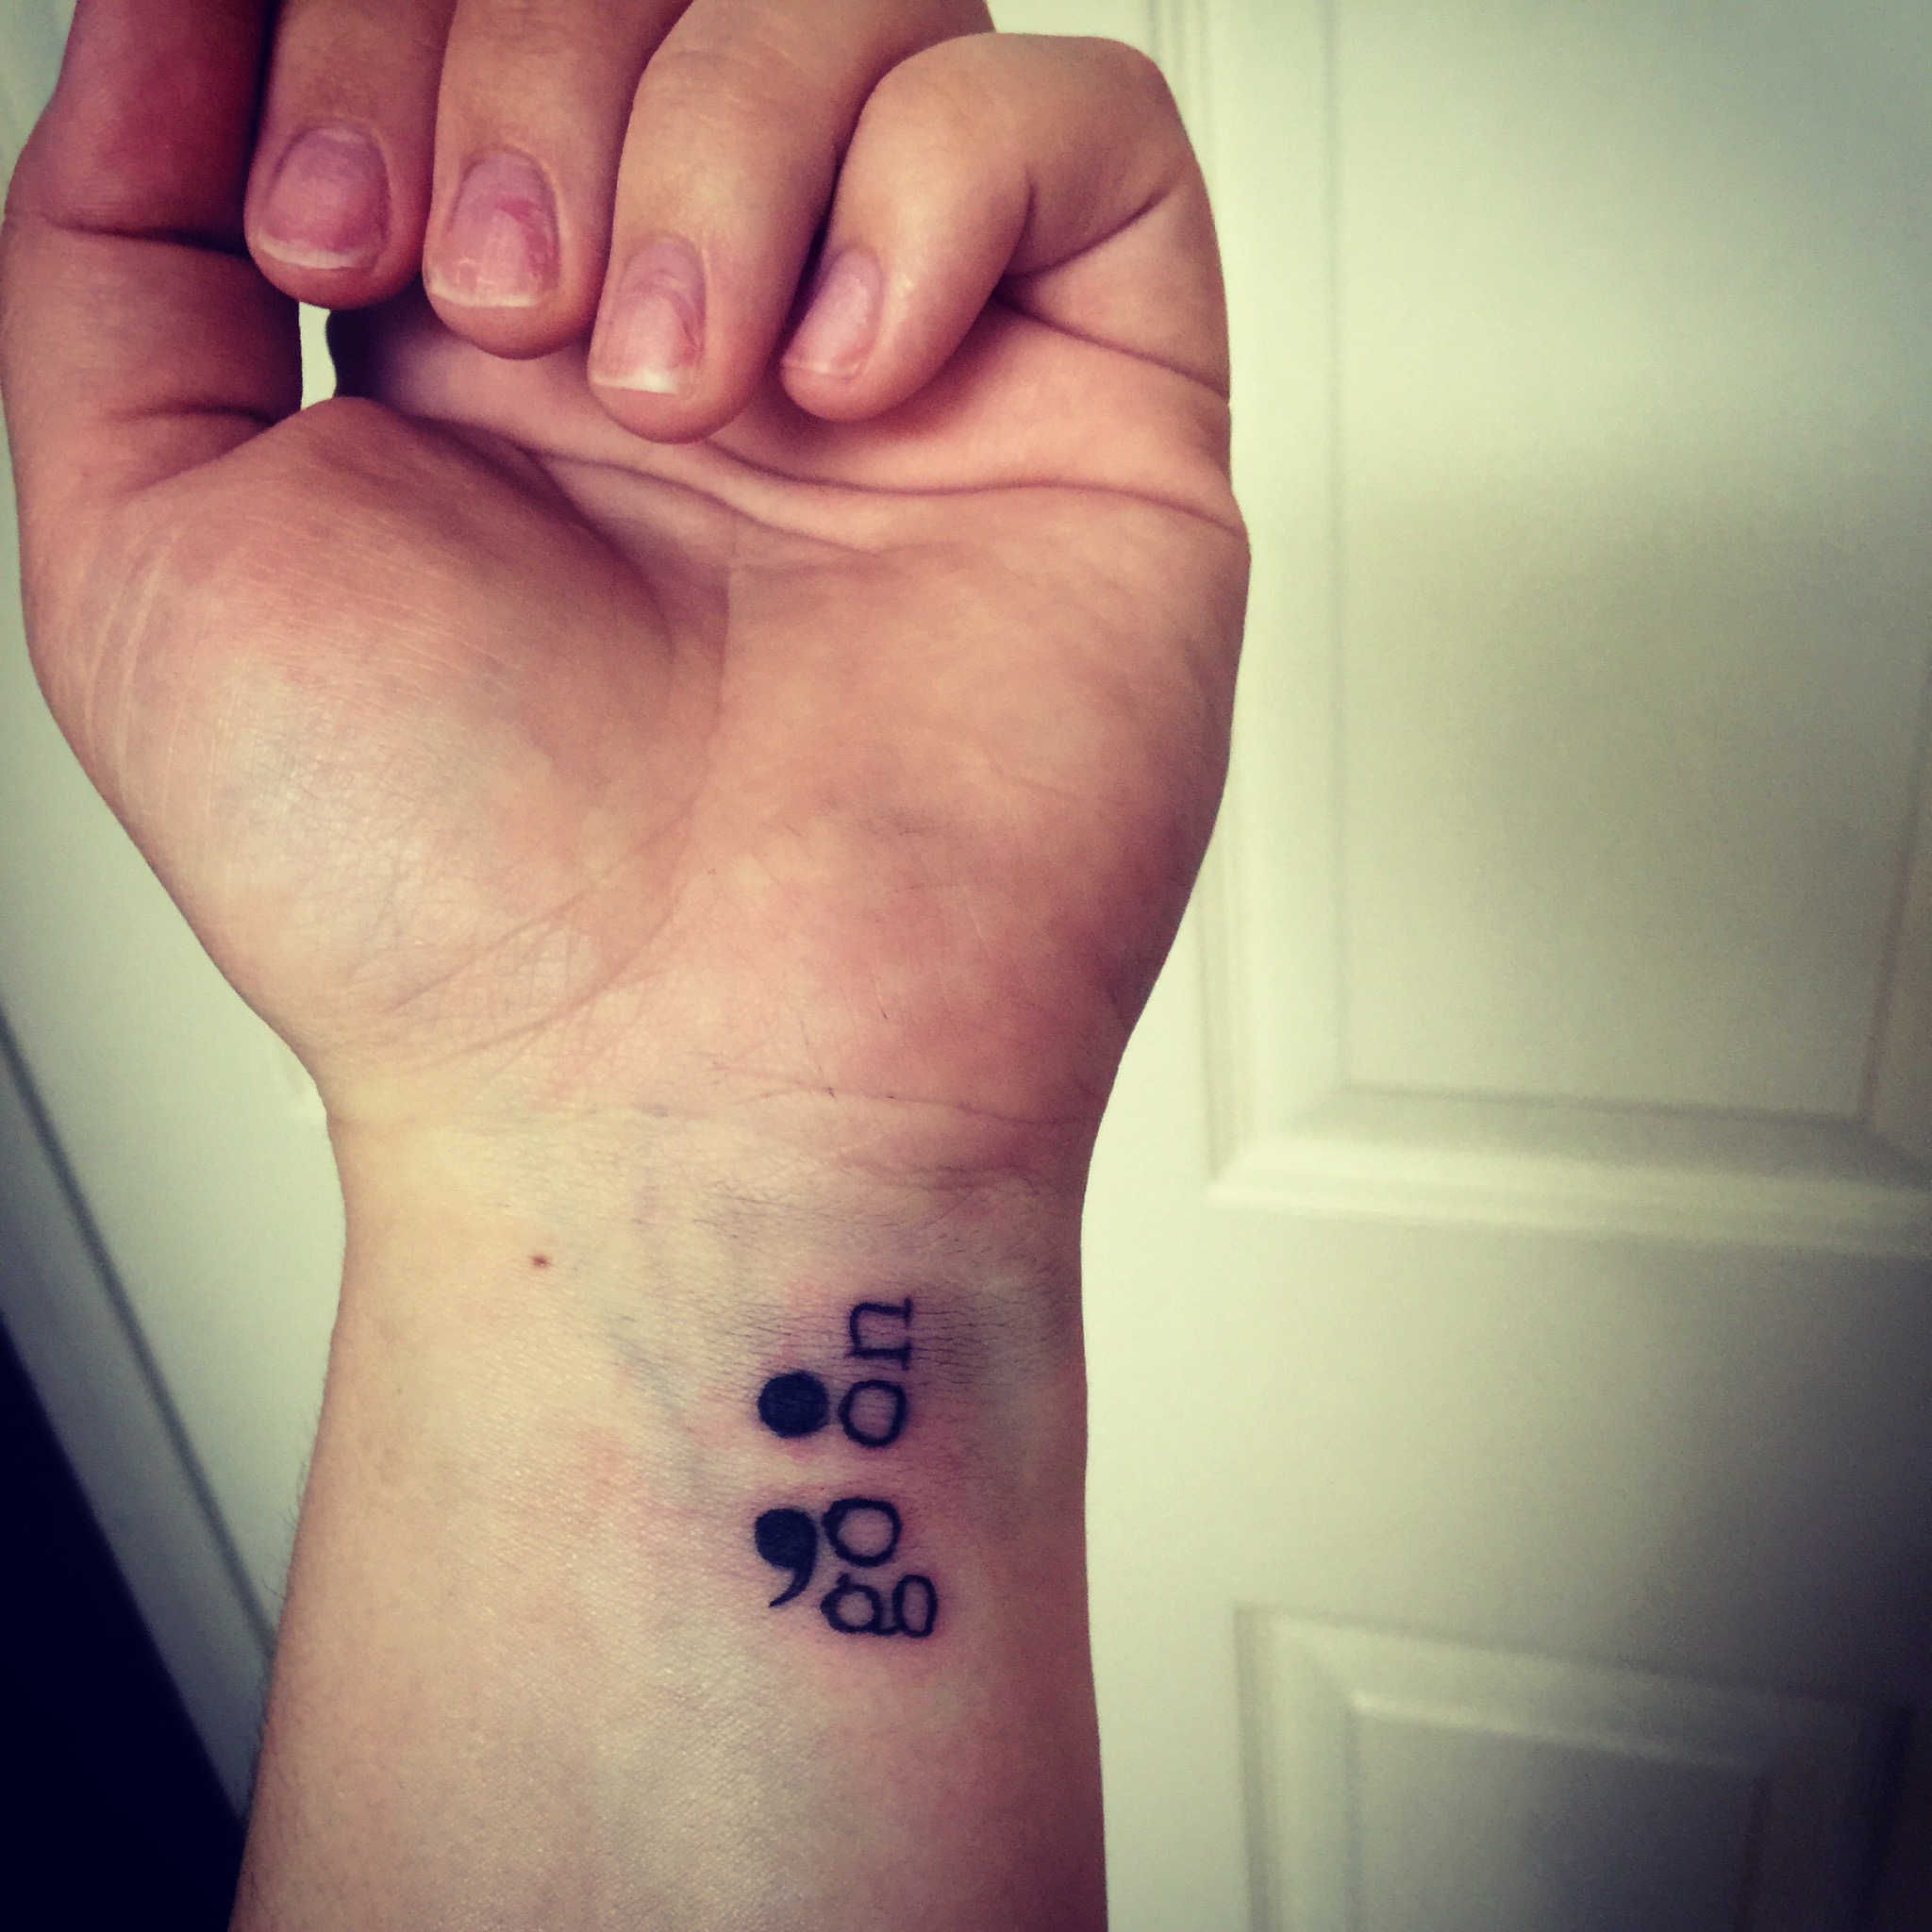 Instead of a tattoo – My OCD Voice